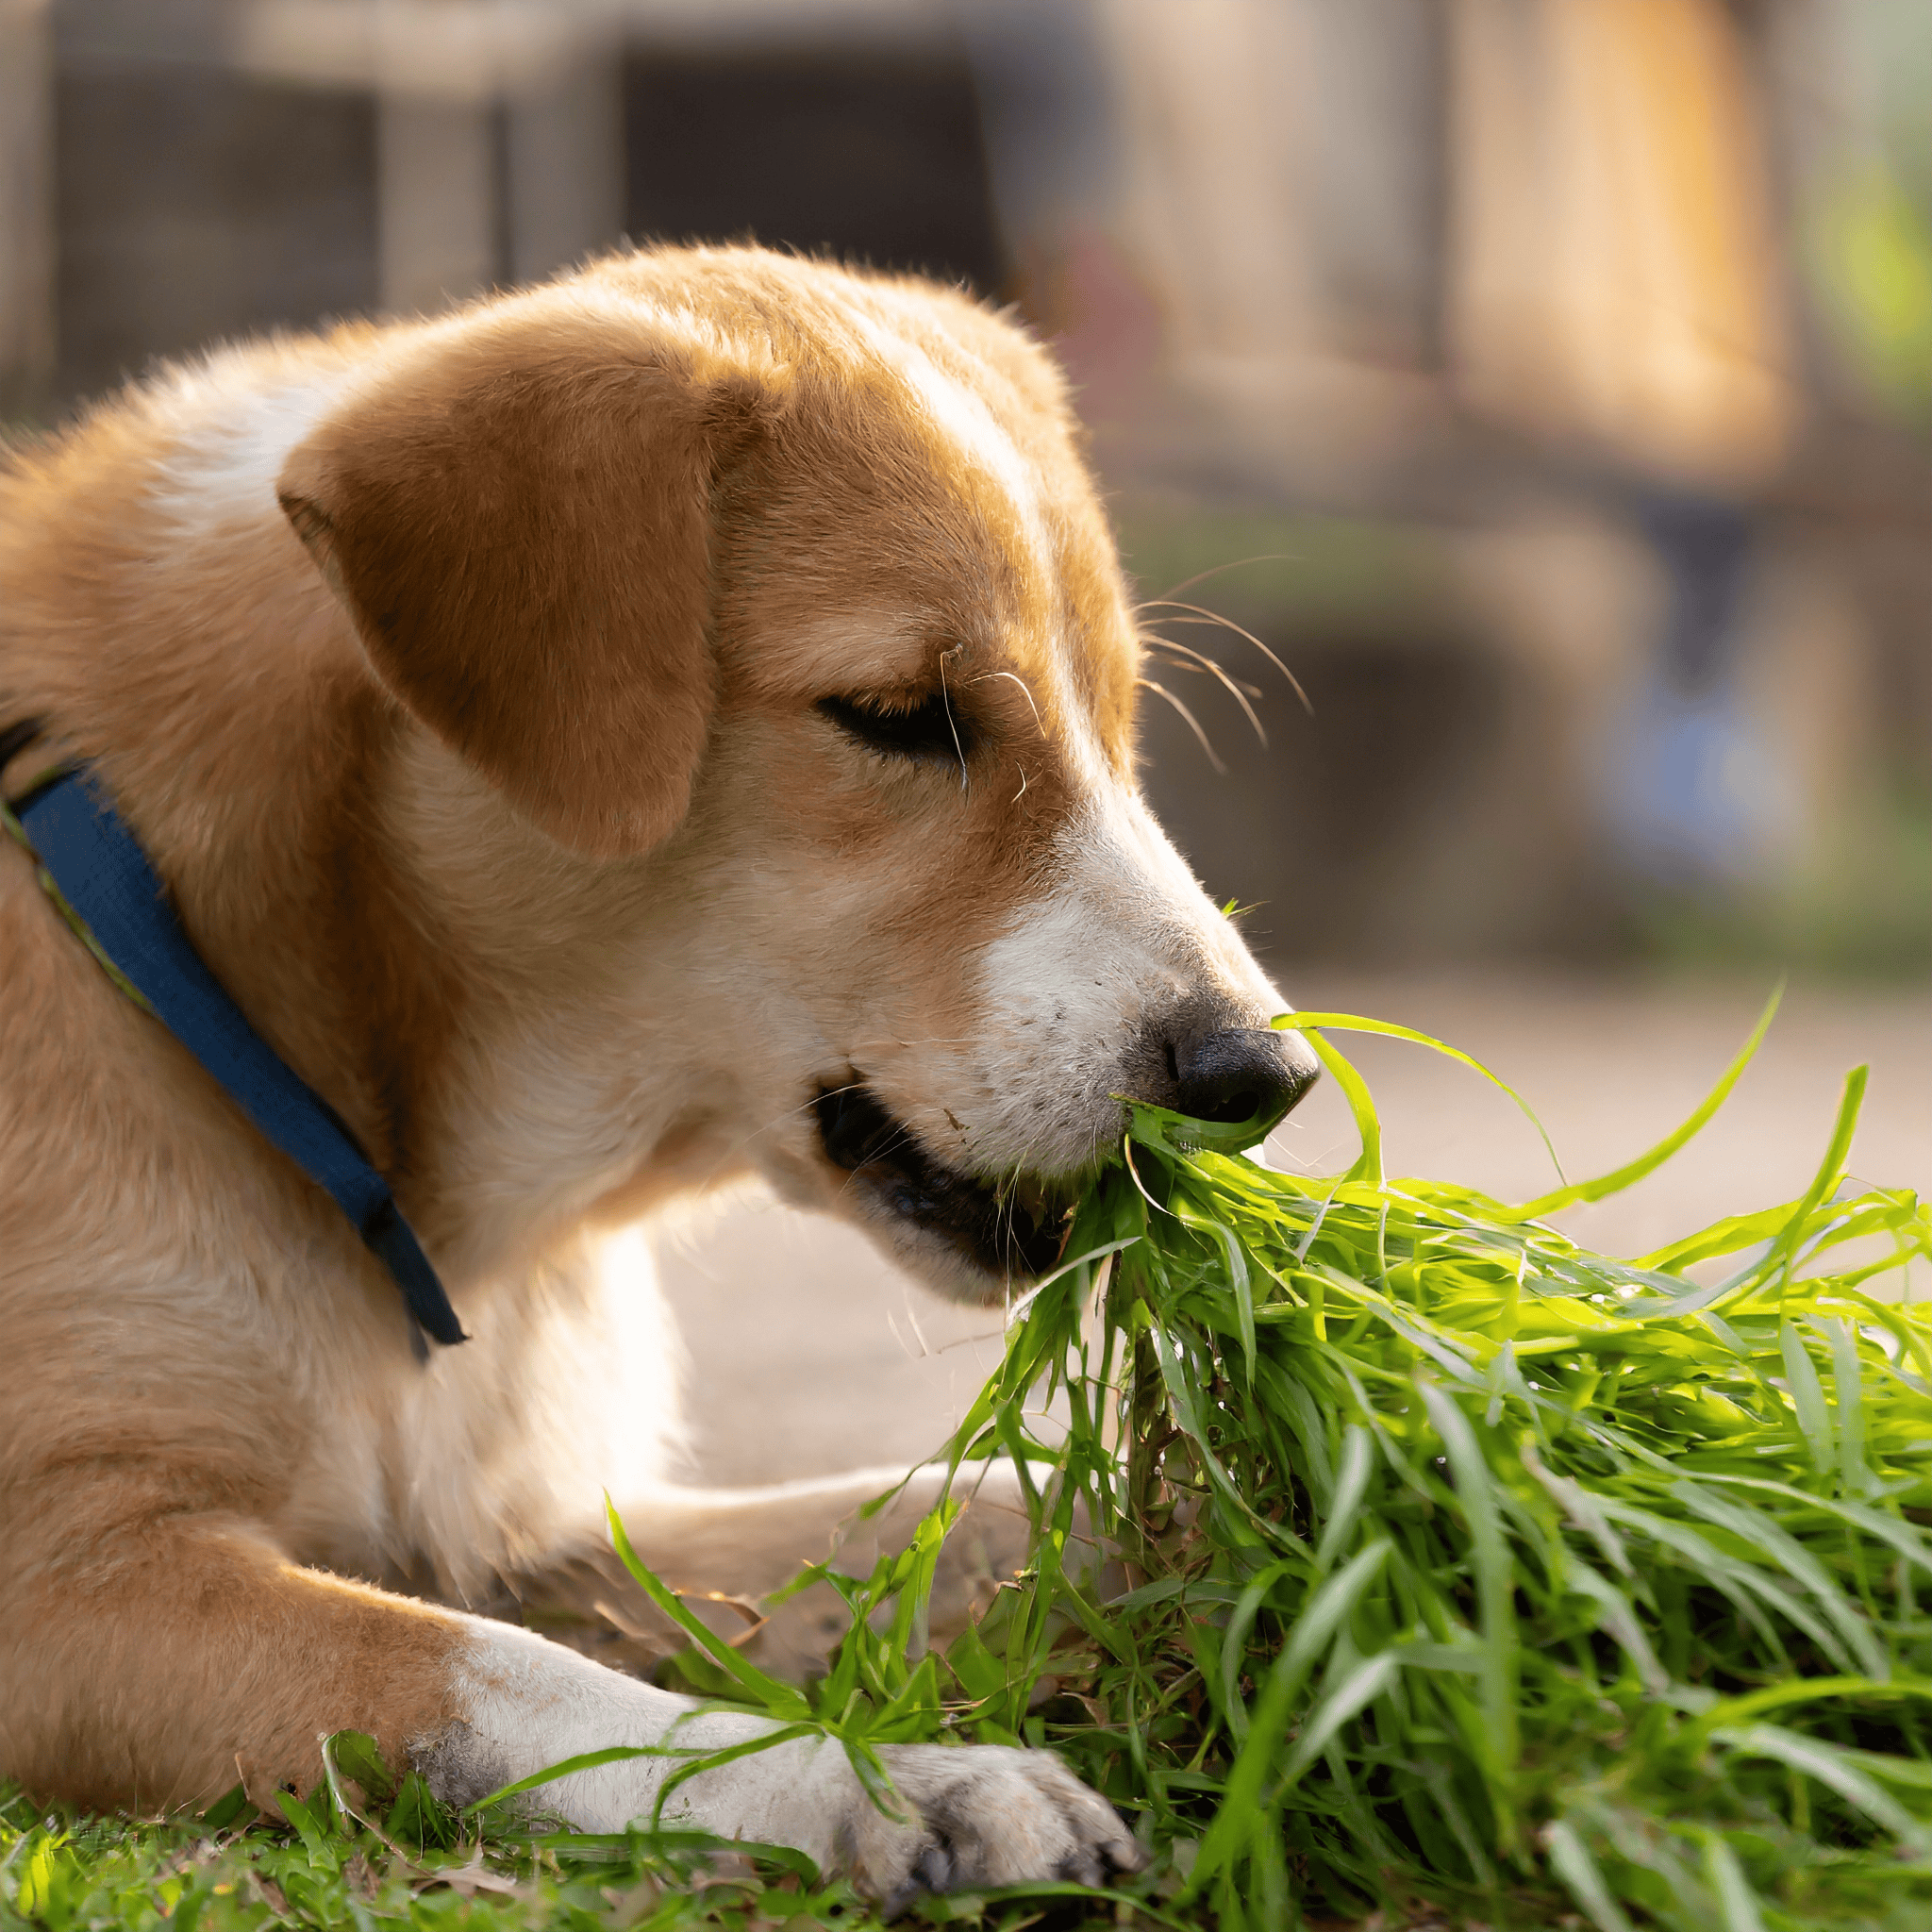 Eating grass is an instinctual behavior. It might mean there is a medical issue. Or your dog might have nutritional deficiencies. It might not mean anything at all!